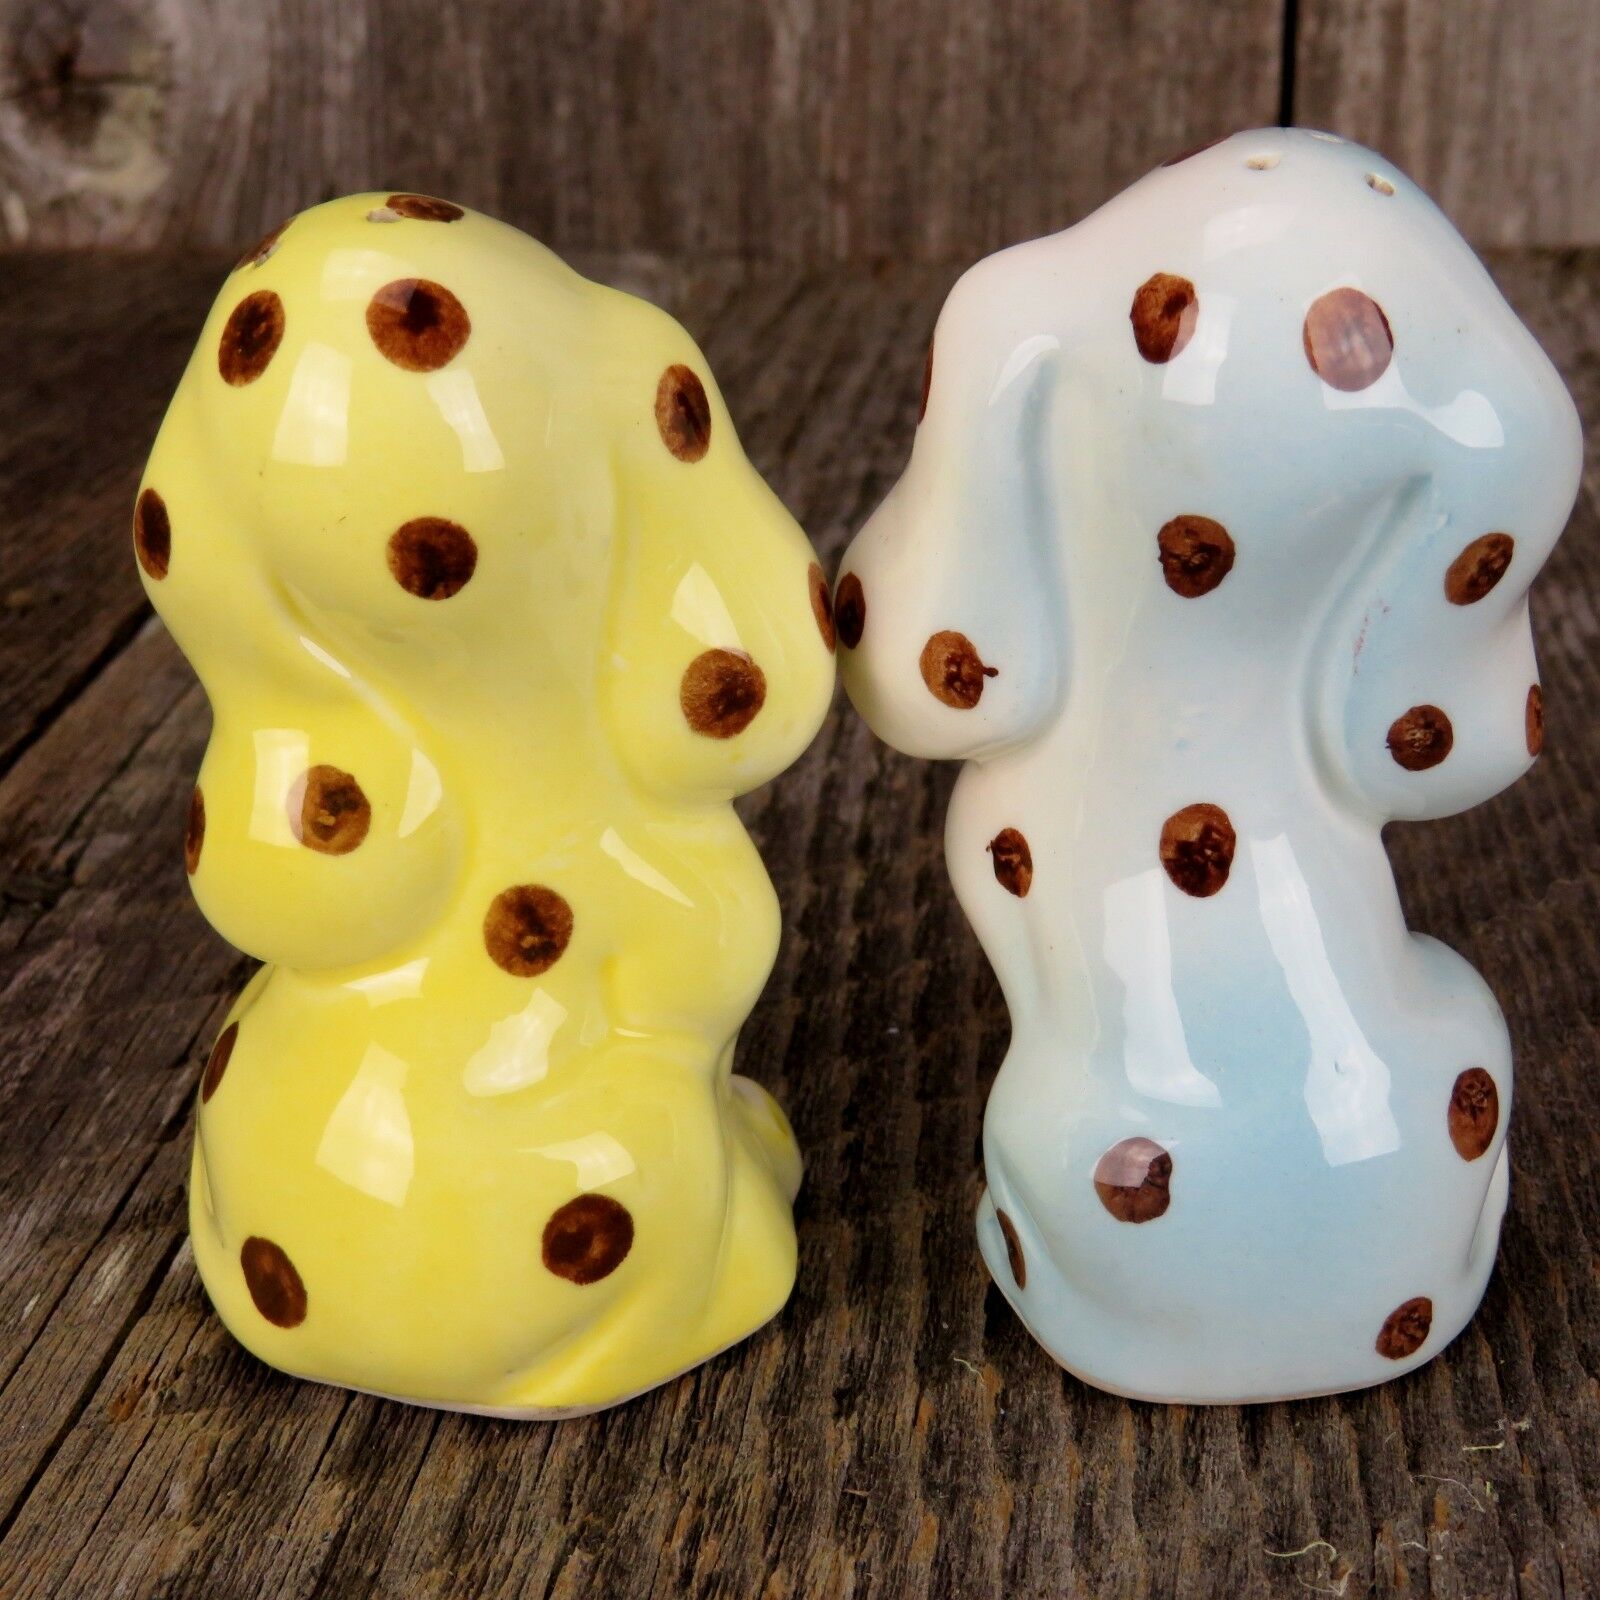 Dog Salt and Pepper Shakers Vintage Porcelain Yellow Blue Spots Japan 1950’s Figurine - At Grandma's Table